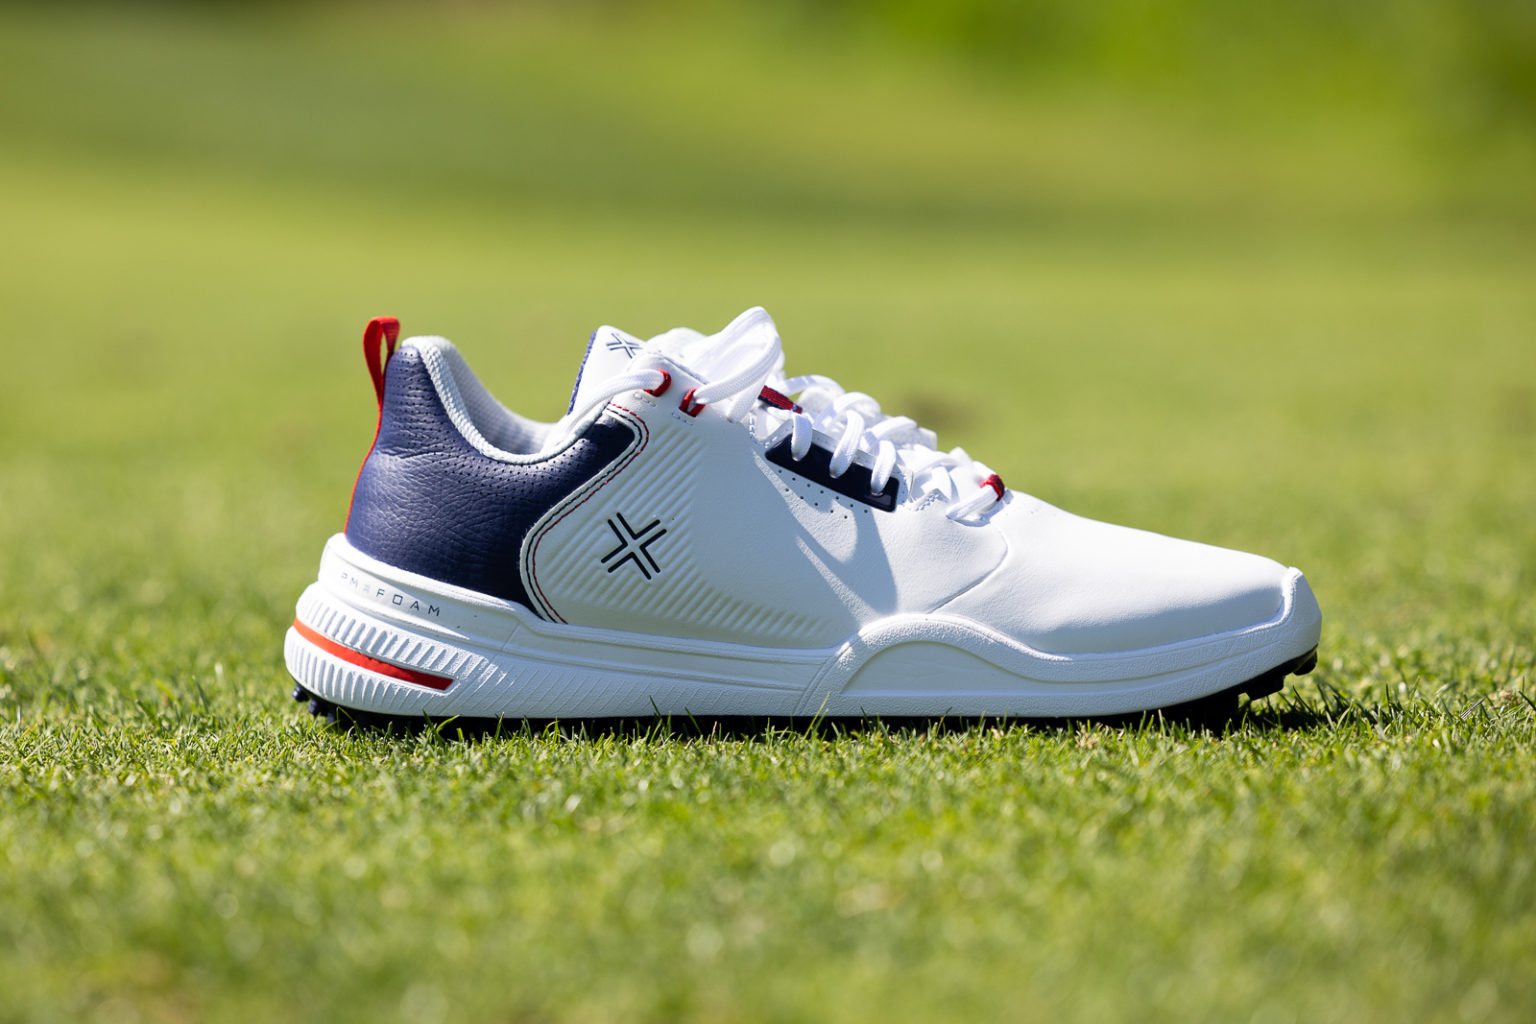 Payntr Golf Shoes Review Do They Live Up to the Hype?